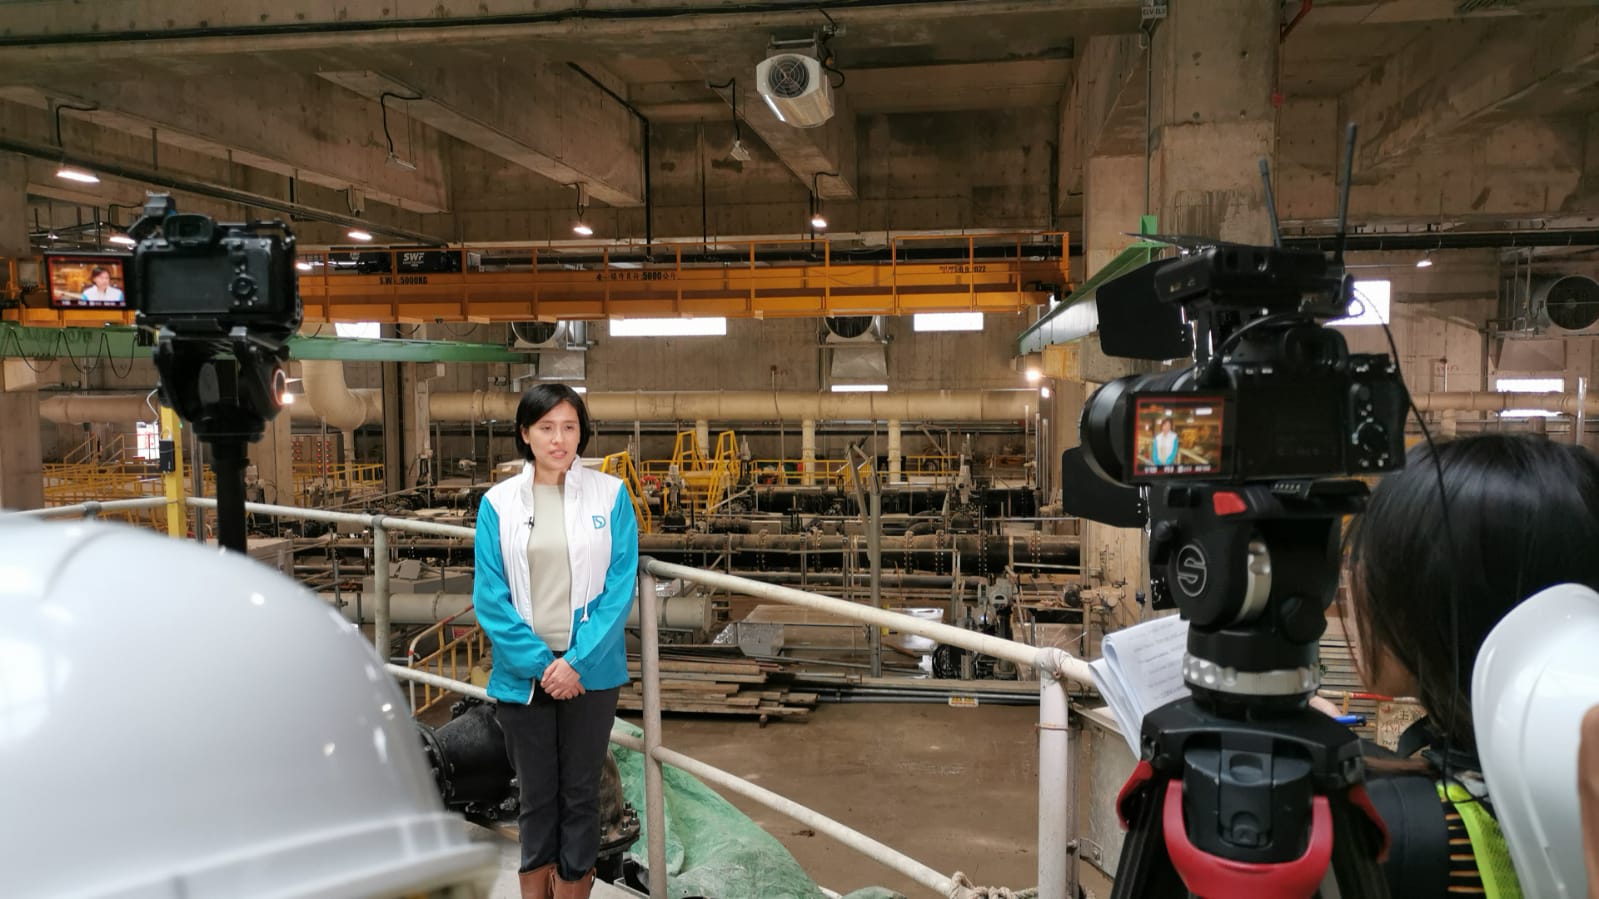 DSD Senior Engineer Ms Doris, CHOI Man-yee mentioned that the project team actively engaged in communication with the public and listened to their opinions during the design of the landscaped deck facilities for the Kwun Tong Sewage Pumping Station